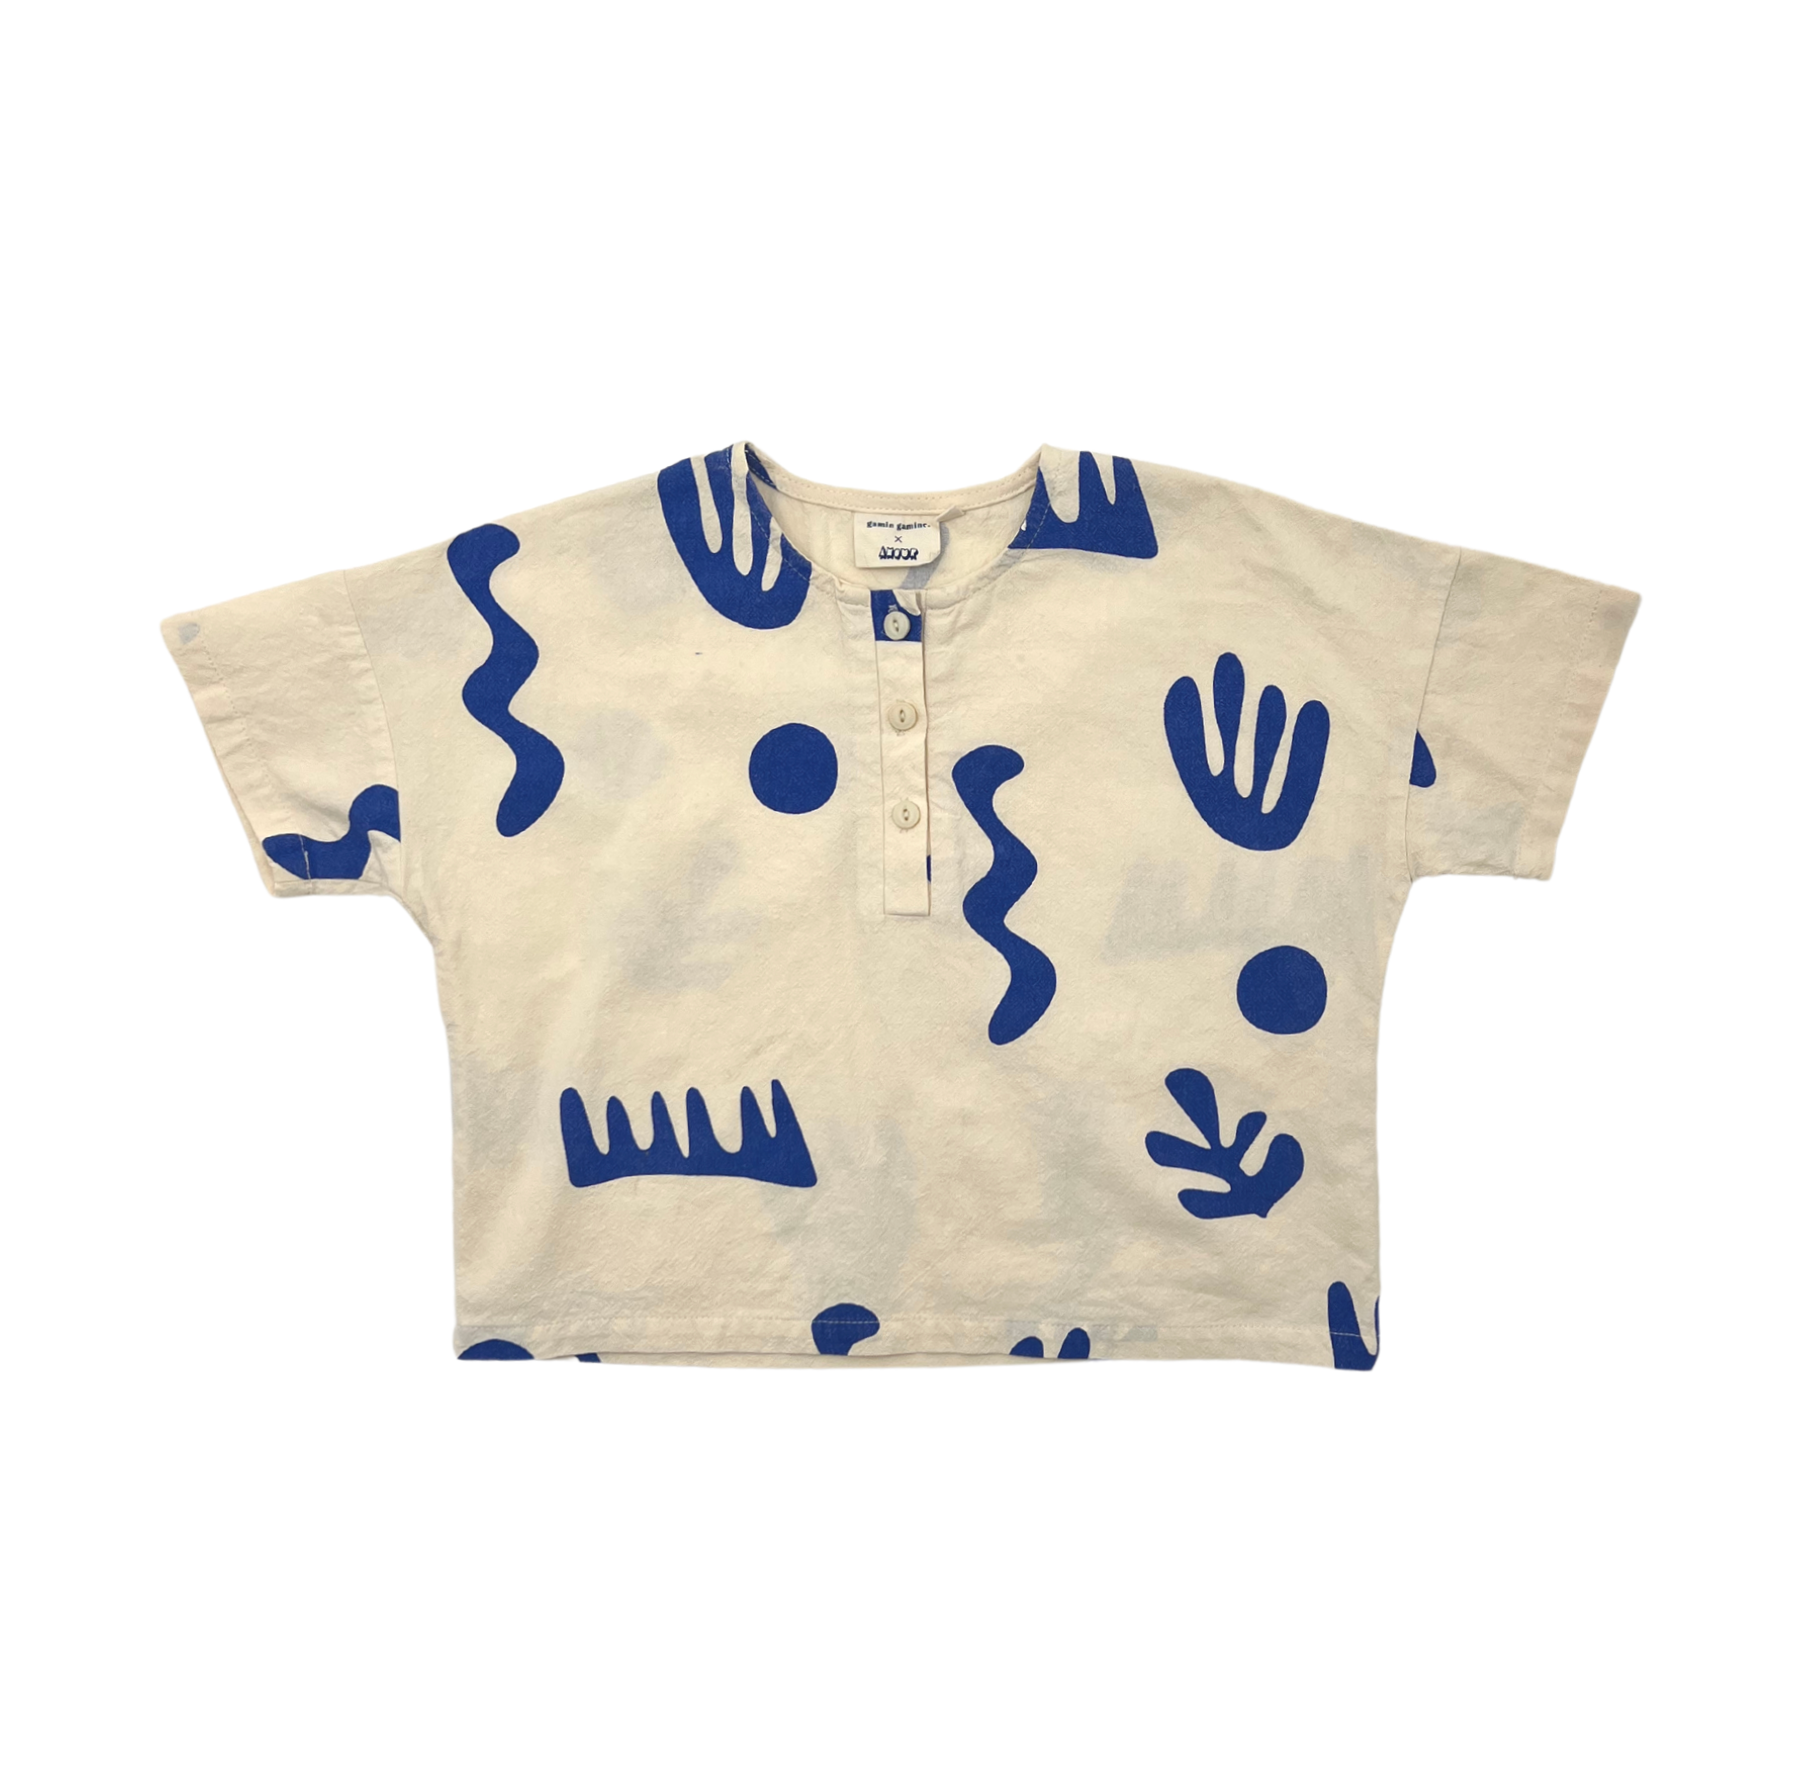 GAMIN GAMINE x AMOUR - Oversize set - 12/18 months